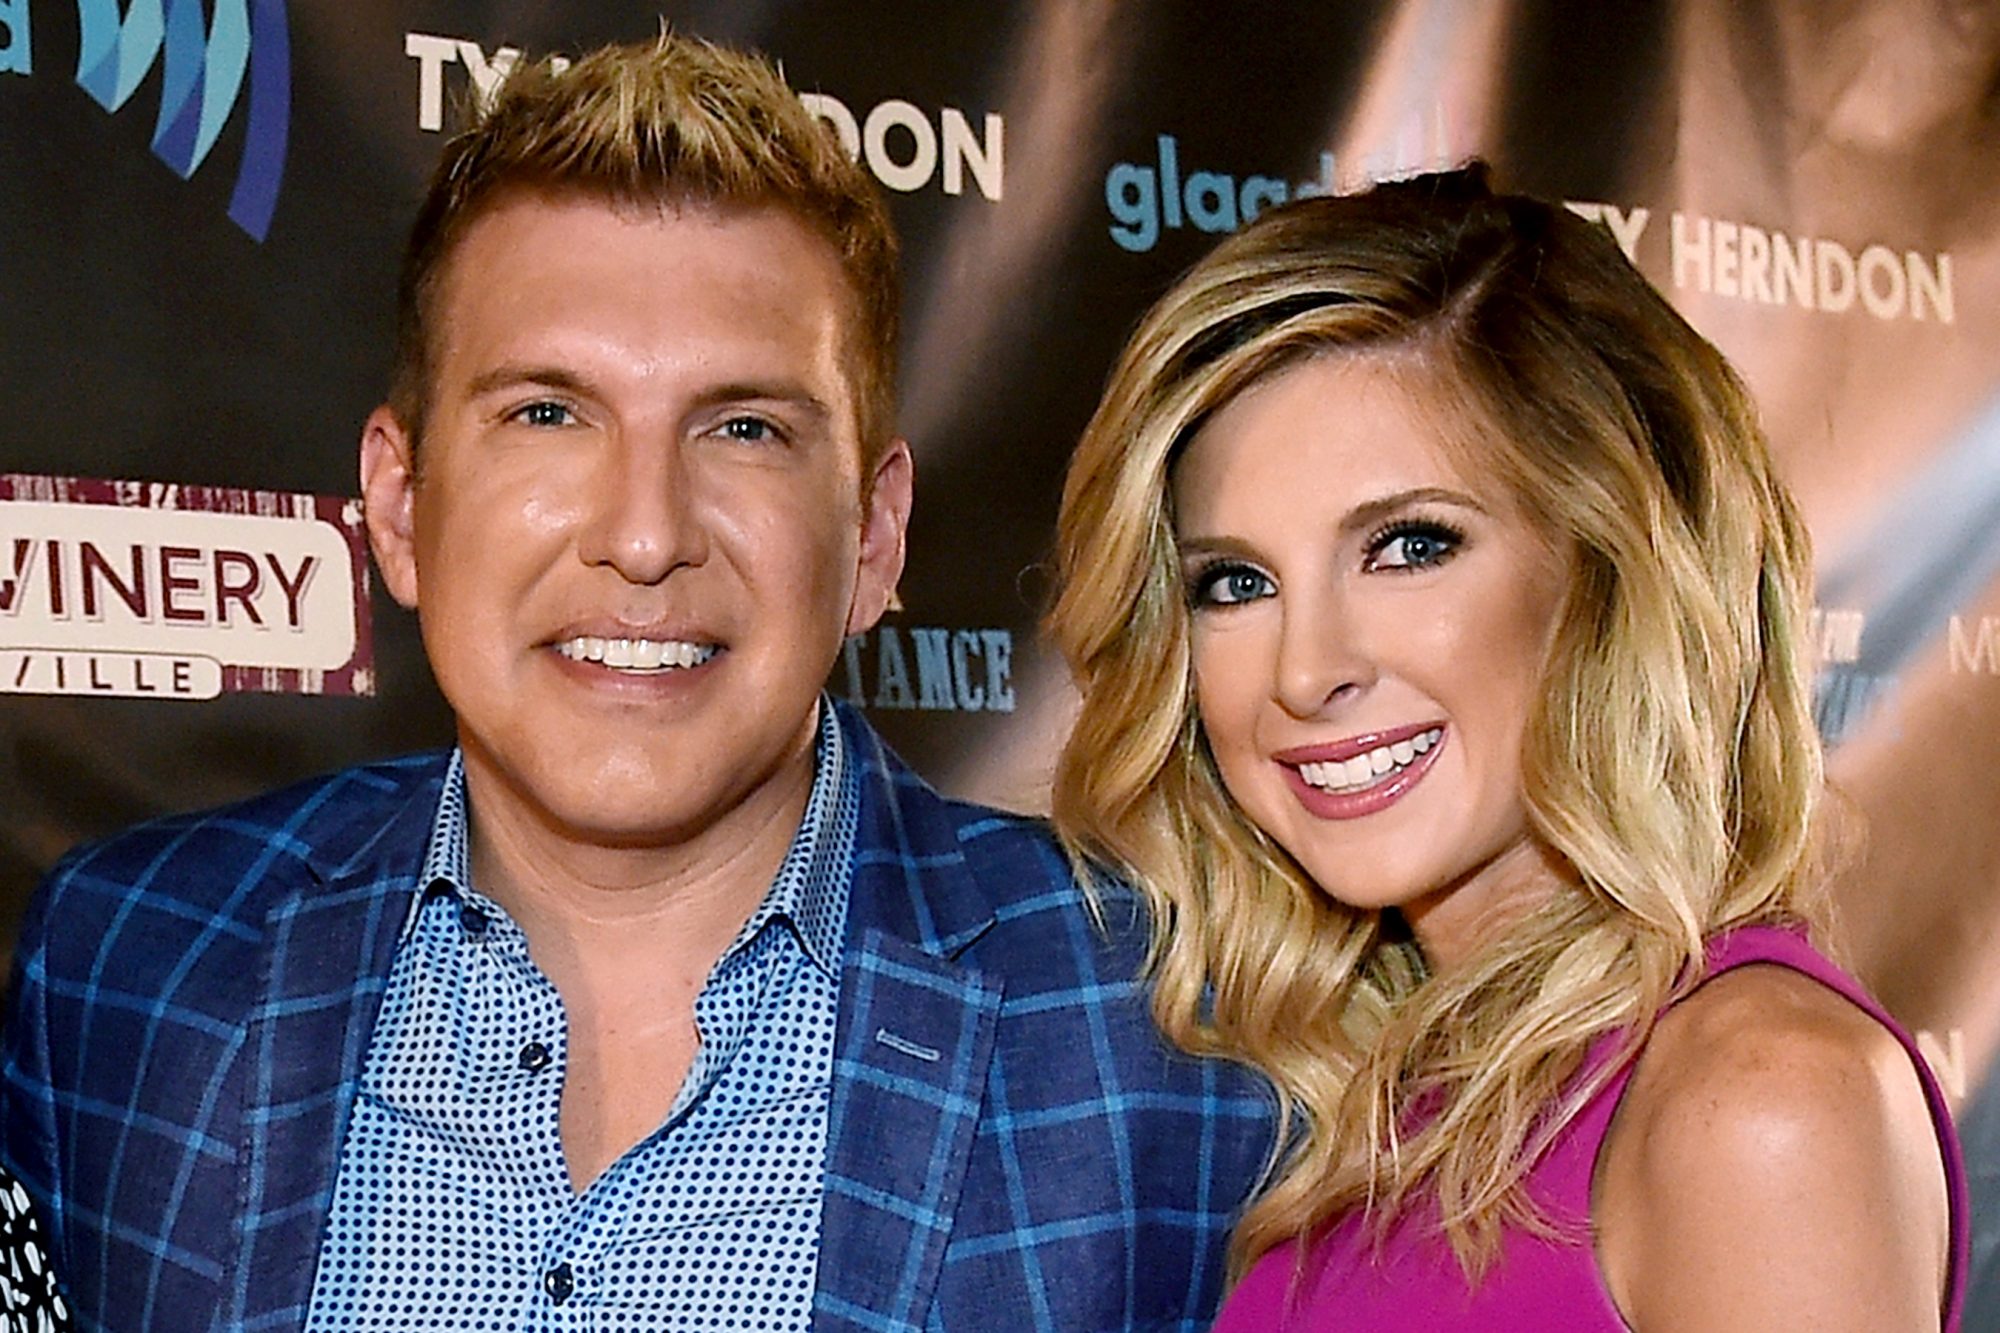 Lindsie wants a baby, which was recently discovered by Todd Chrisley’s